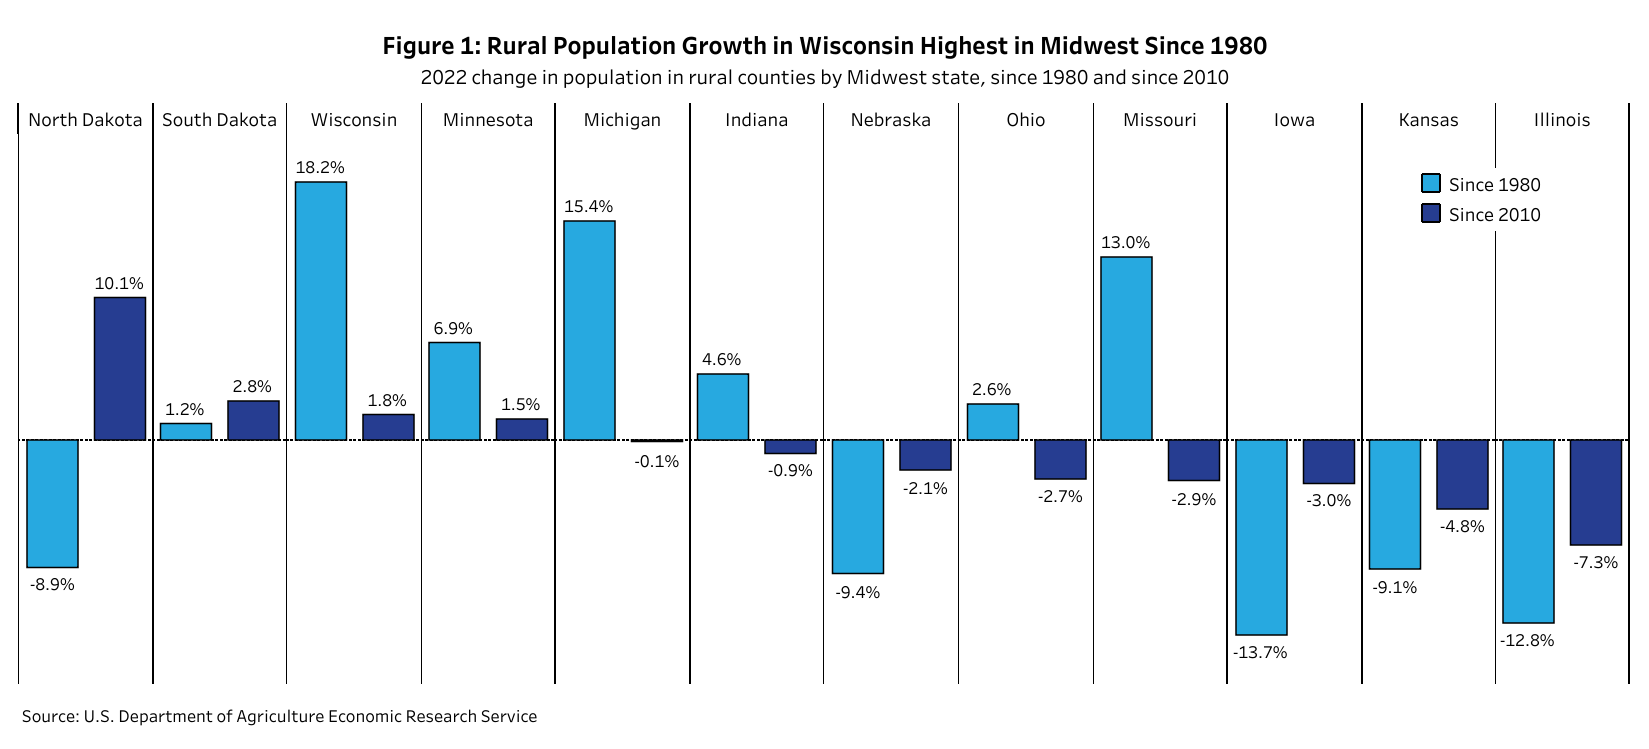 This graphic compares rural migration in Wisconsin to other midwest states